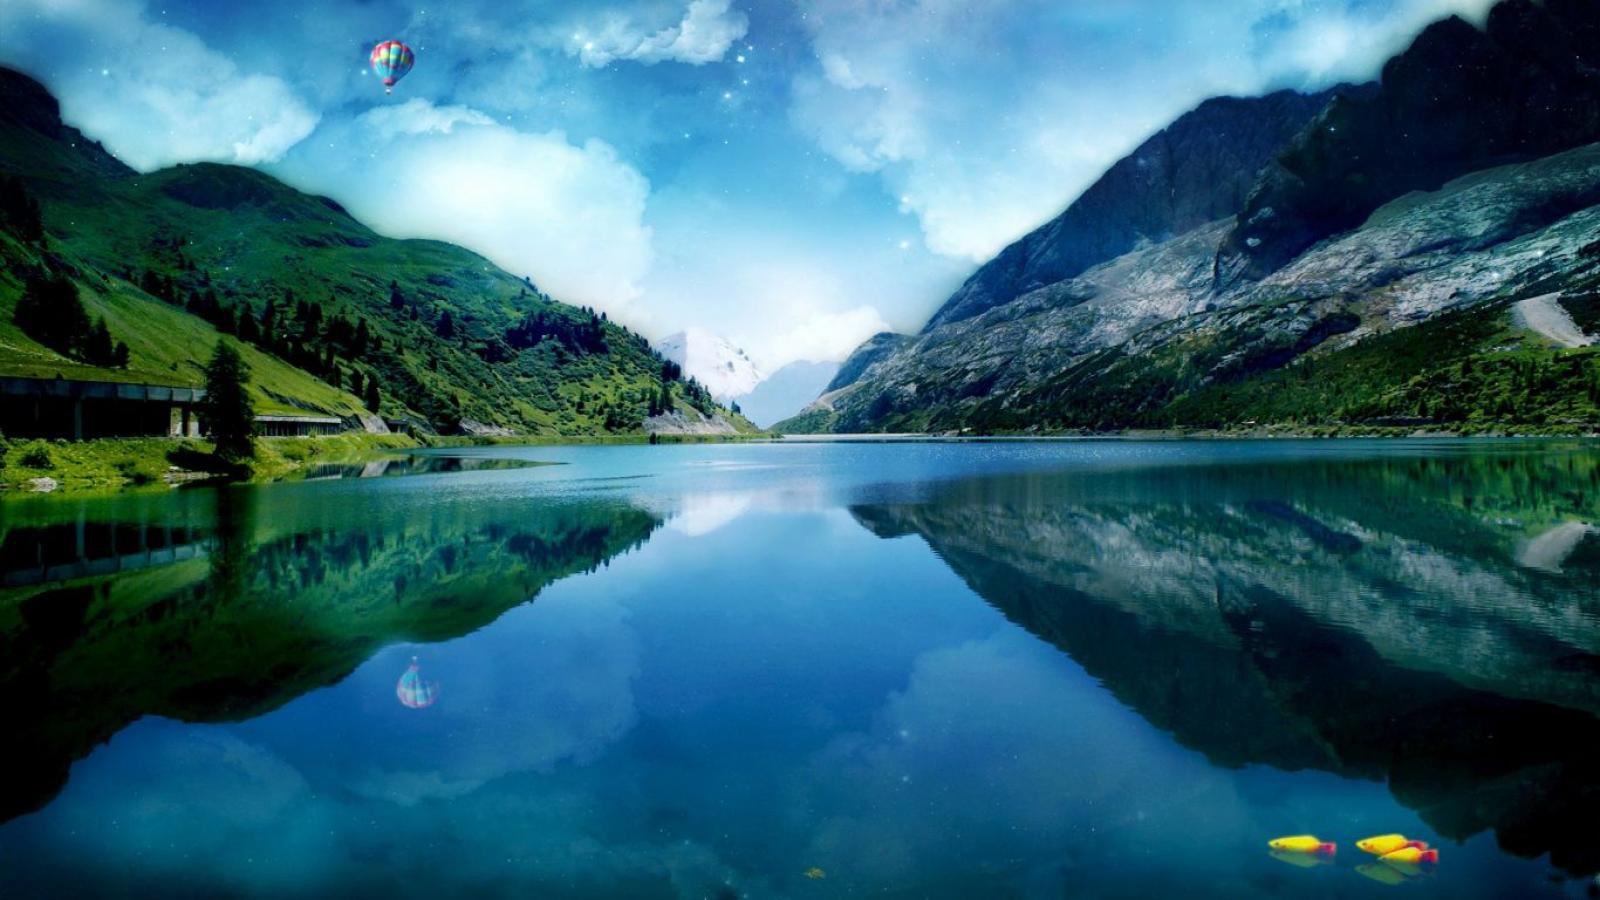 Background Picture Lake And River Wallpaper Of